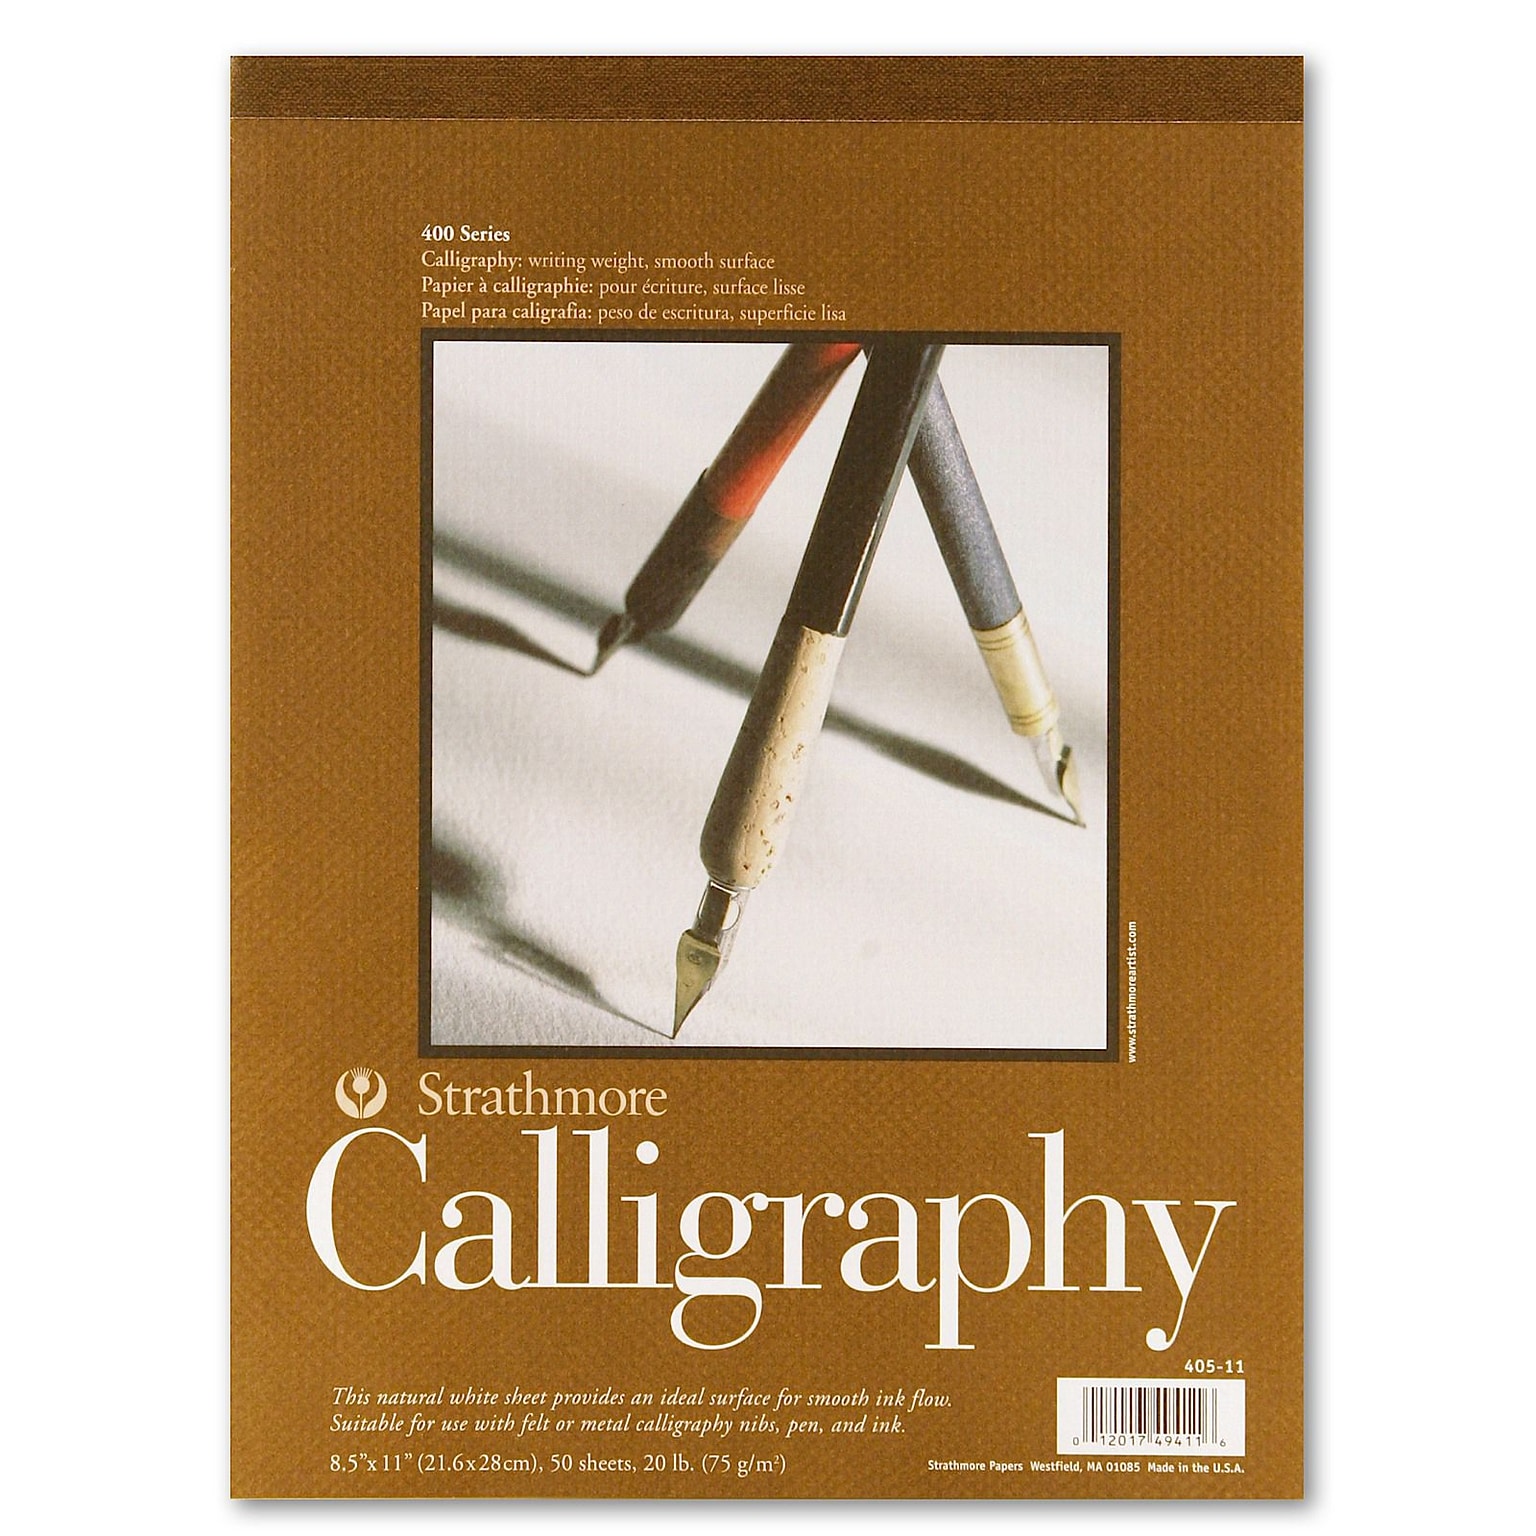 Strathmore 400 Series Calligraphy Pad Pad Of 50 [Pack Of 3] (3PK-405-11-1)